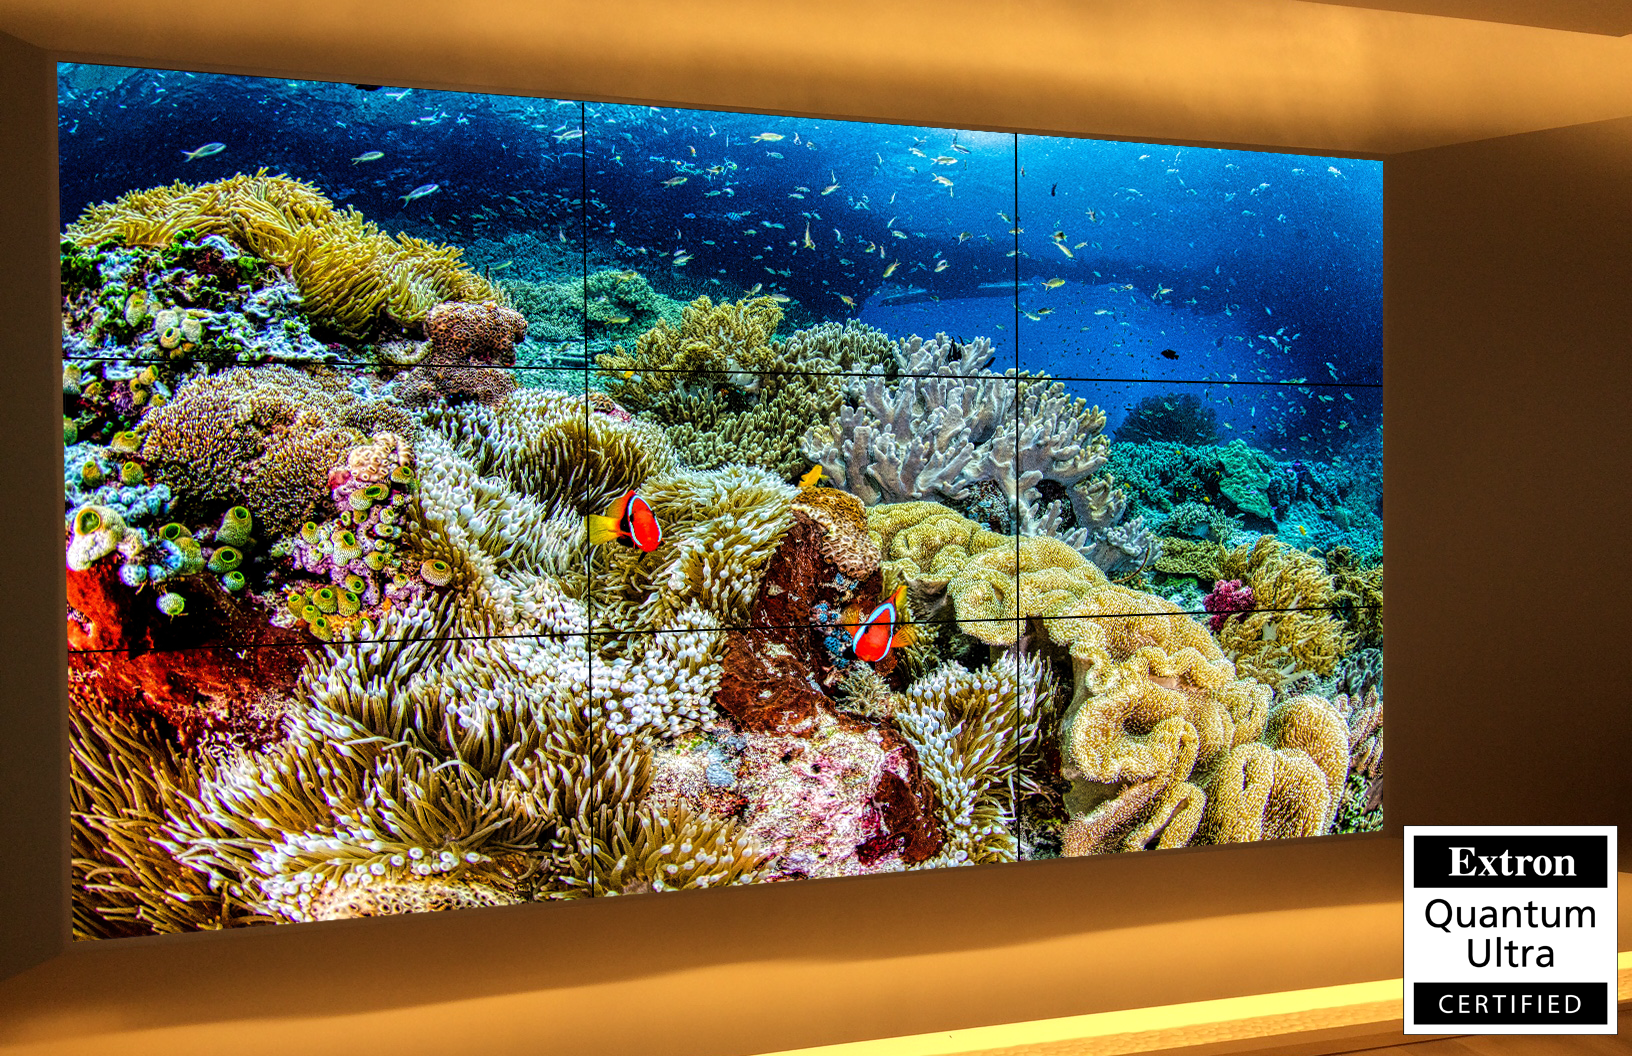 A three-by-three GPO display NEX-series video wall is shown with an image of the sea with coral and fish. It also has an "extra quantum ultra certifies" sticker in the bottom left hand corner.